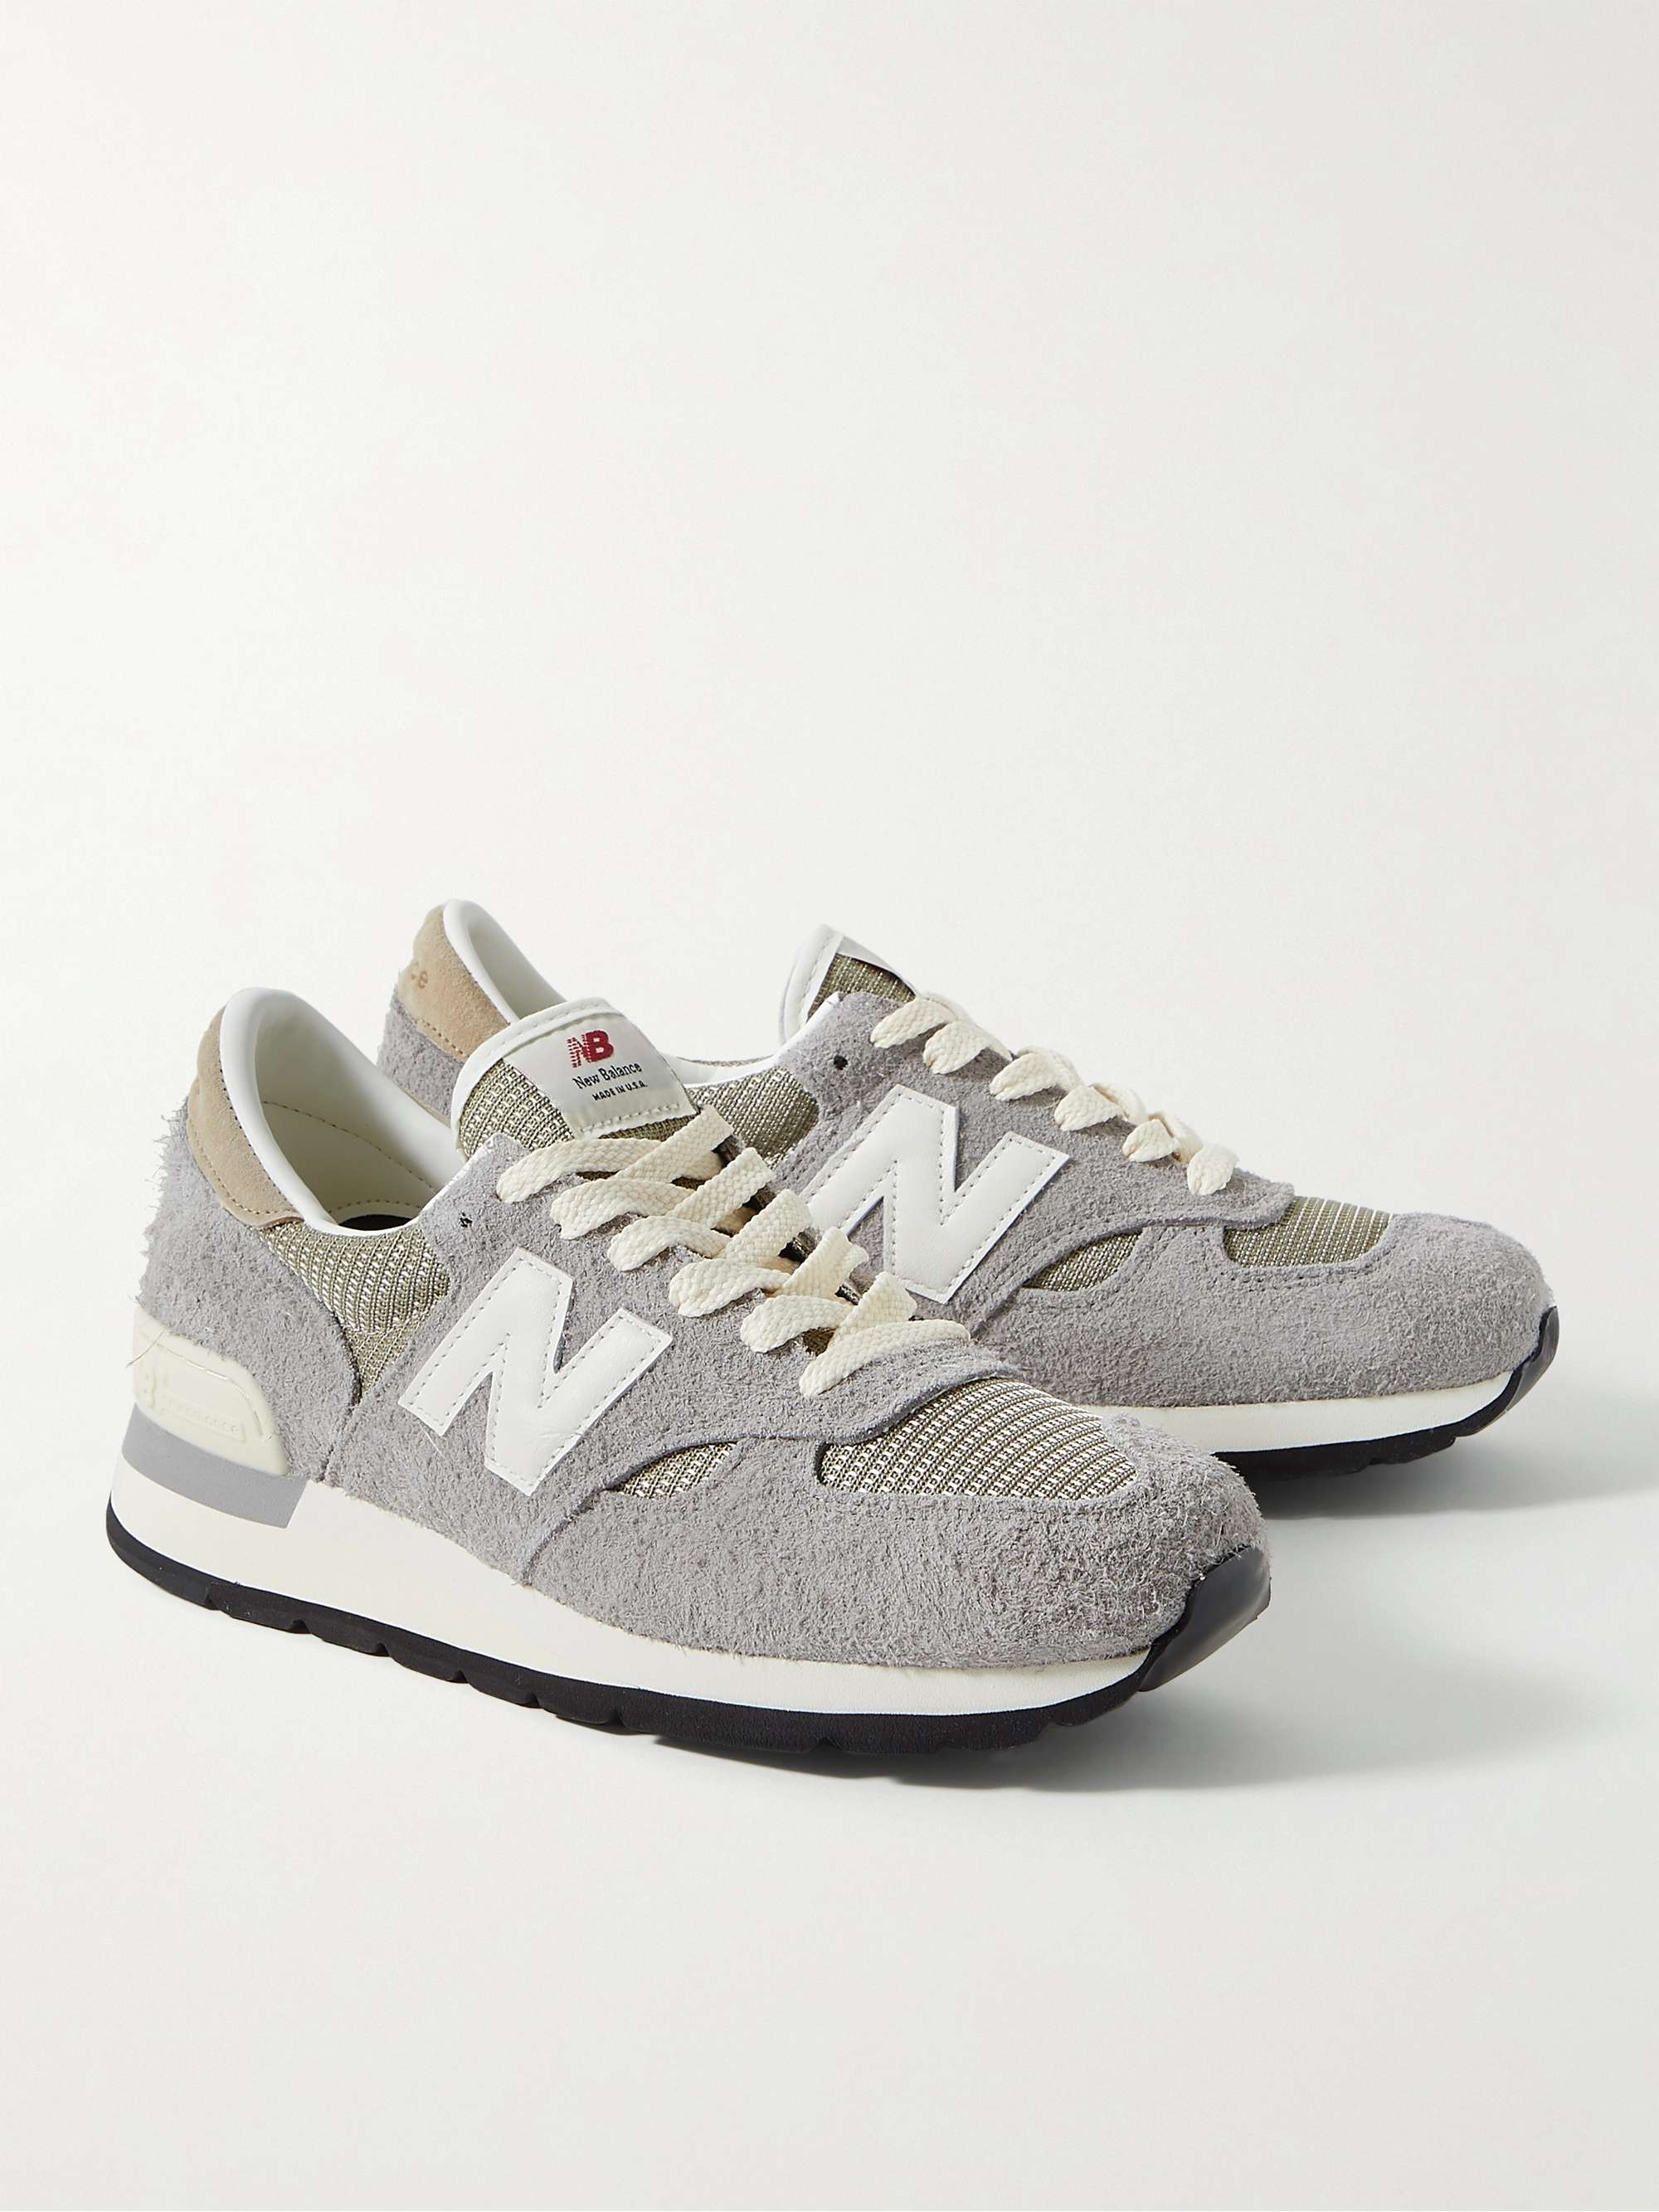 NEW BALANCE M990v1 Suede and Mesh Sneakers